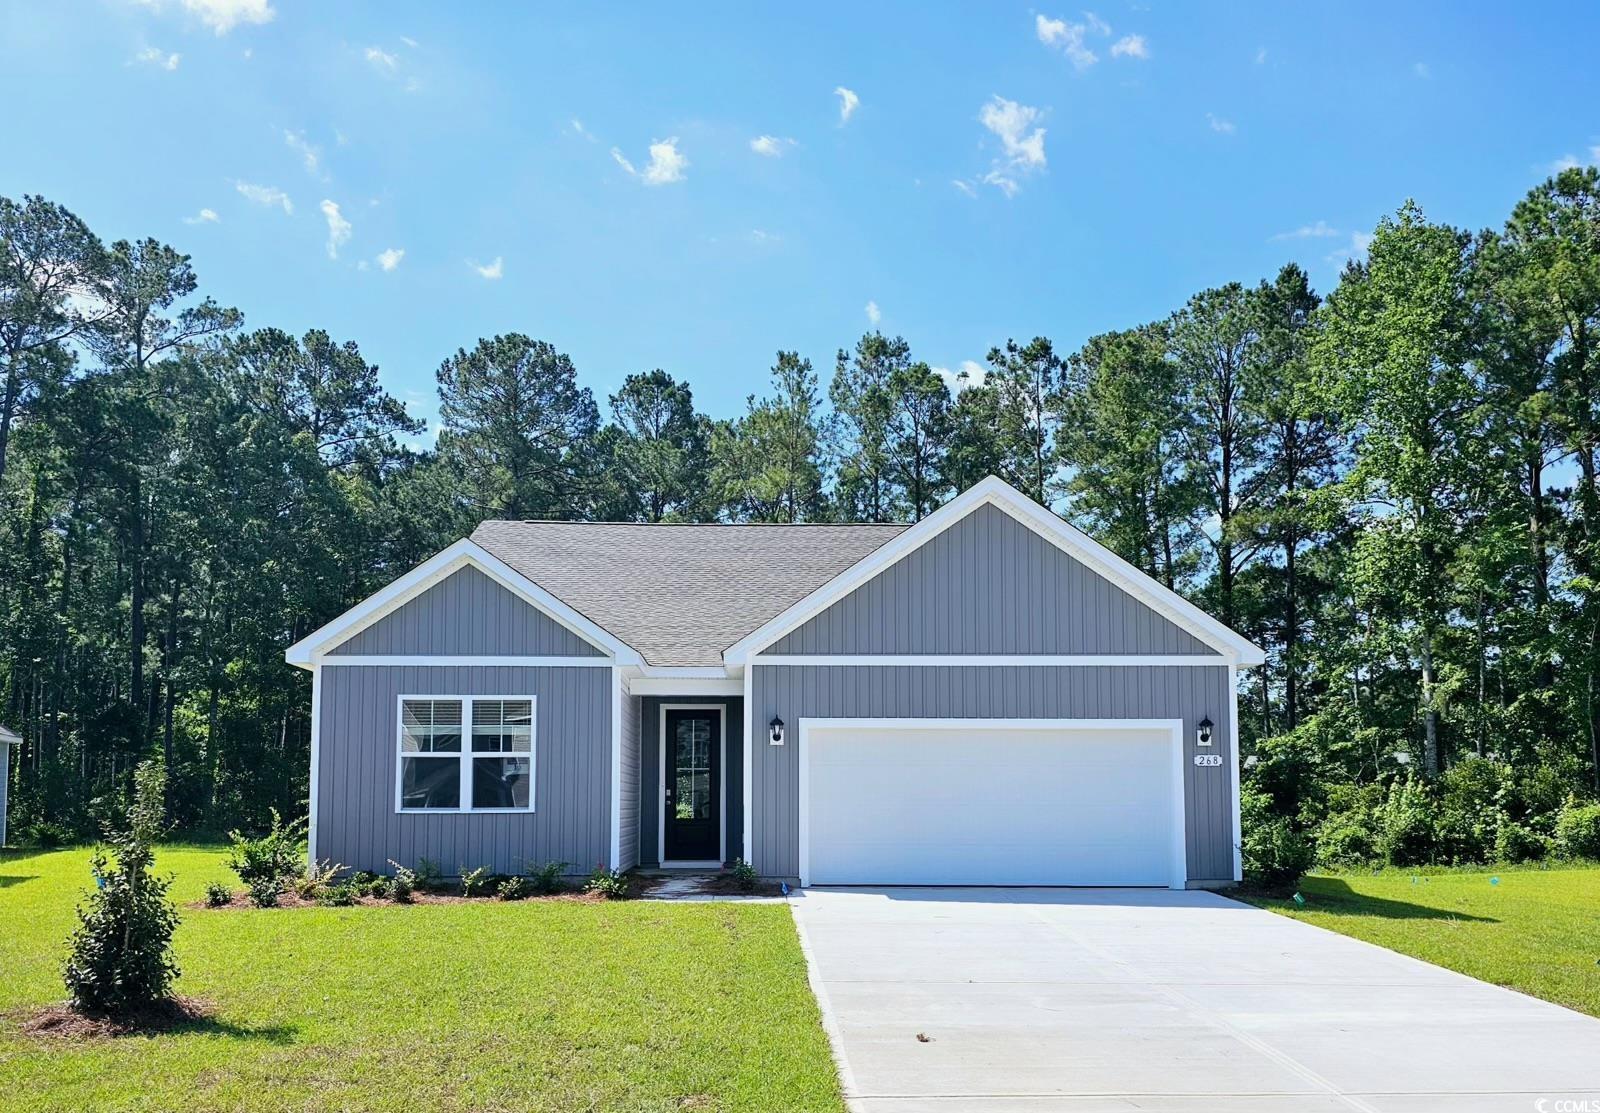 come see out newest community in the murrells inlet conveniently located to all the area has to offer! the litchfield is one of our most desirable single-story homes. this 4 bedroom, 2 bath floorplan offers 11 ft. ceilings and a large open living area. spacious kitchen with breakfast bar/counter height island with granite counters, corner walk-in pantry, stainless steel appliances with a natural gas cooking and 36" cabinets. other features include an upgraded 4 panel sliding glass door leading to the oversized back porch. owners' suite has double closets, walk-in tiled shower, linen closet, and double vanity.      this is america's smart home! each of our homes comes with an industry leading smart home technology package that will allow you to control the thermostat, front door light and lock, and video doorbell from your smartphone or with voice commands to alexa. *photos are of a similar litchfield home.  (home and community information, including pricing, included features, terms, availability and amenities, are subject to change prior to sale at any time without notice or obligation. square footages are approximate. pictures, photographs, colors, features, and sizes are for illustration purposes only and will vary from the homes as built. equal housing opportunity builder.)